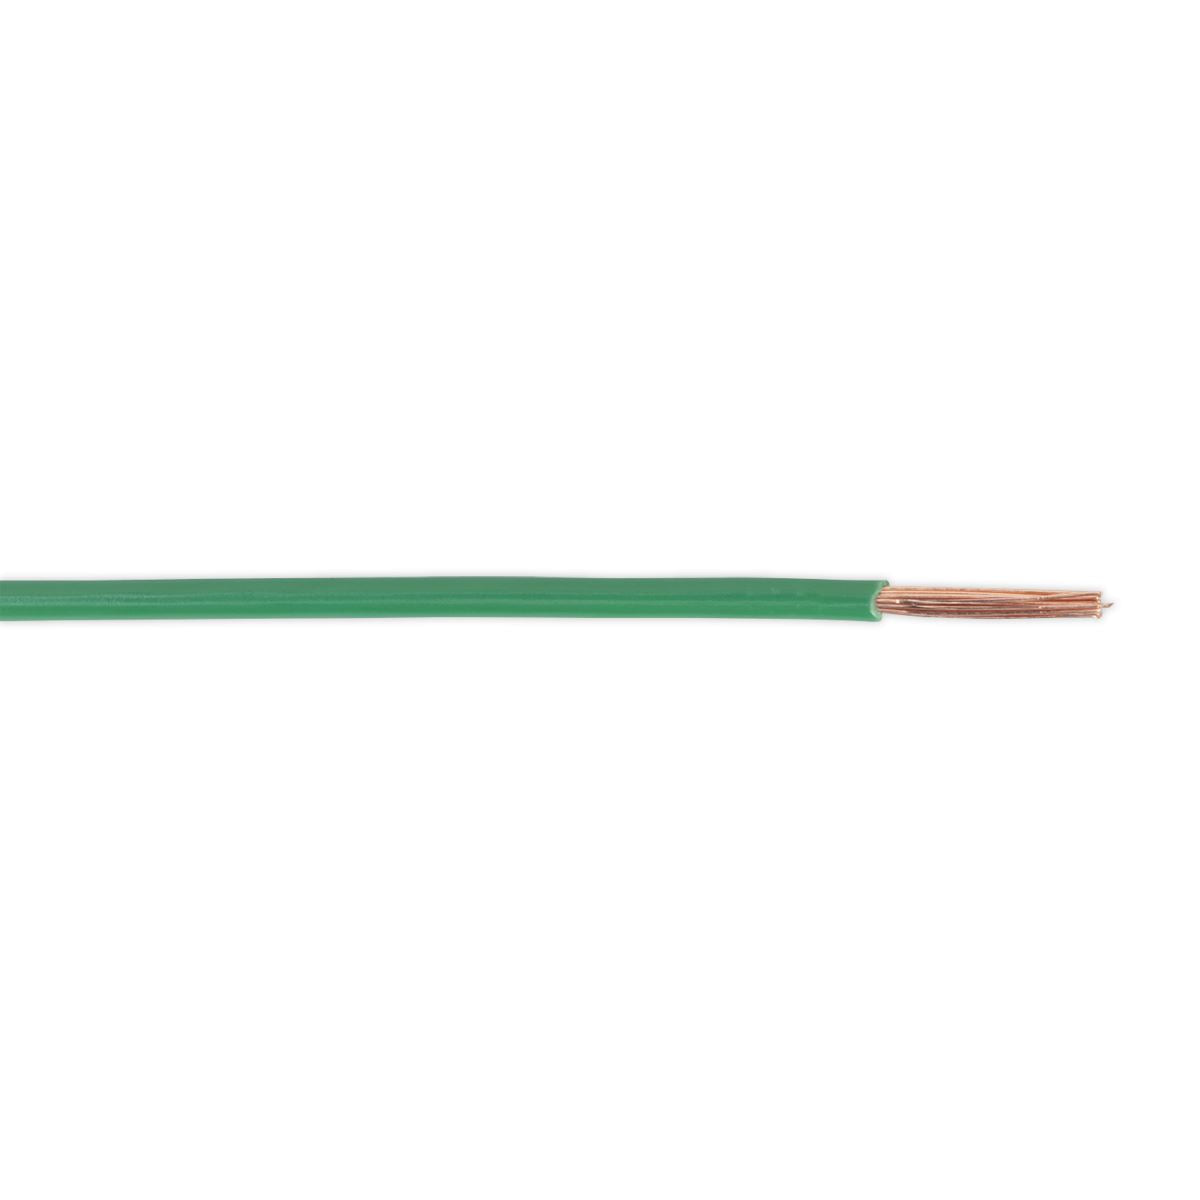 Sealey Automotive Cable Thin Wall Single 2mm² 28/0.30mm 50m Green